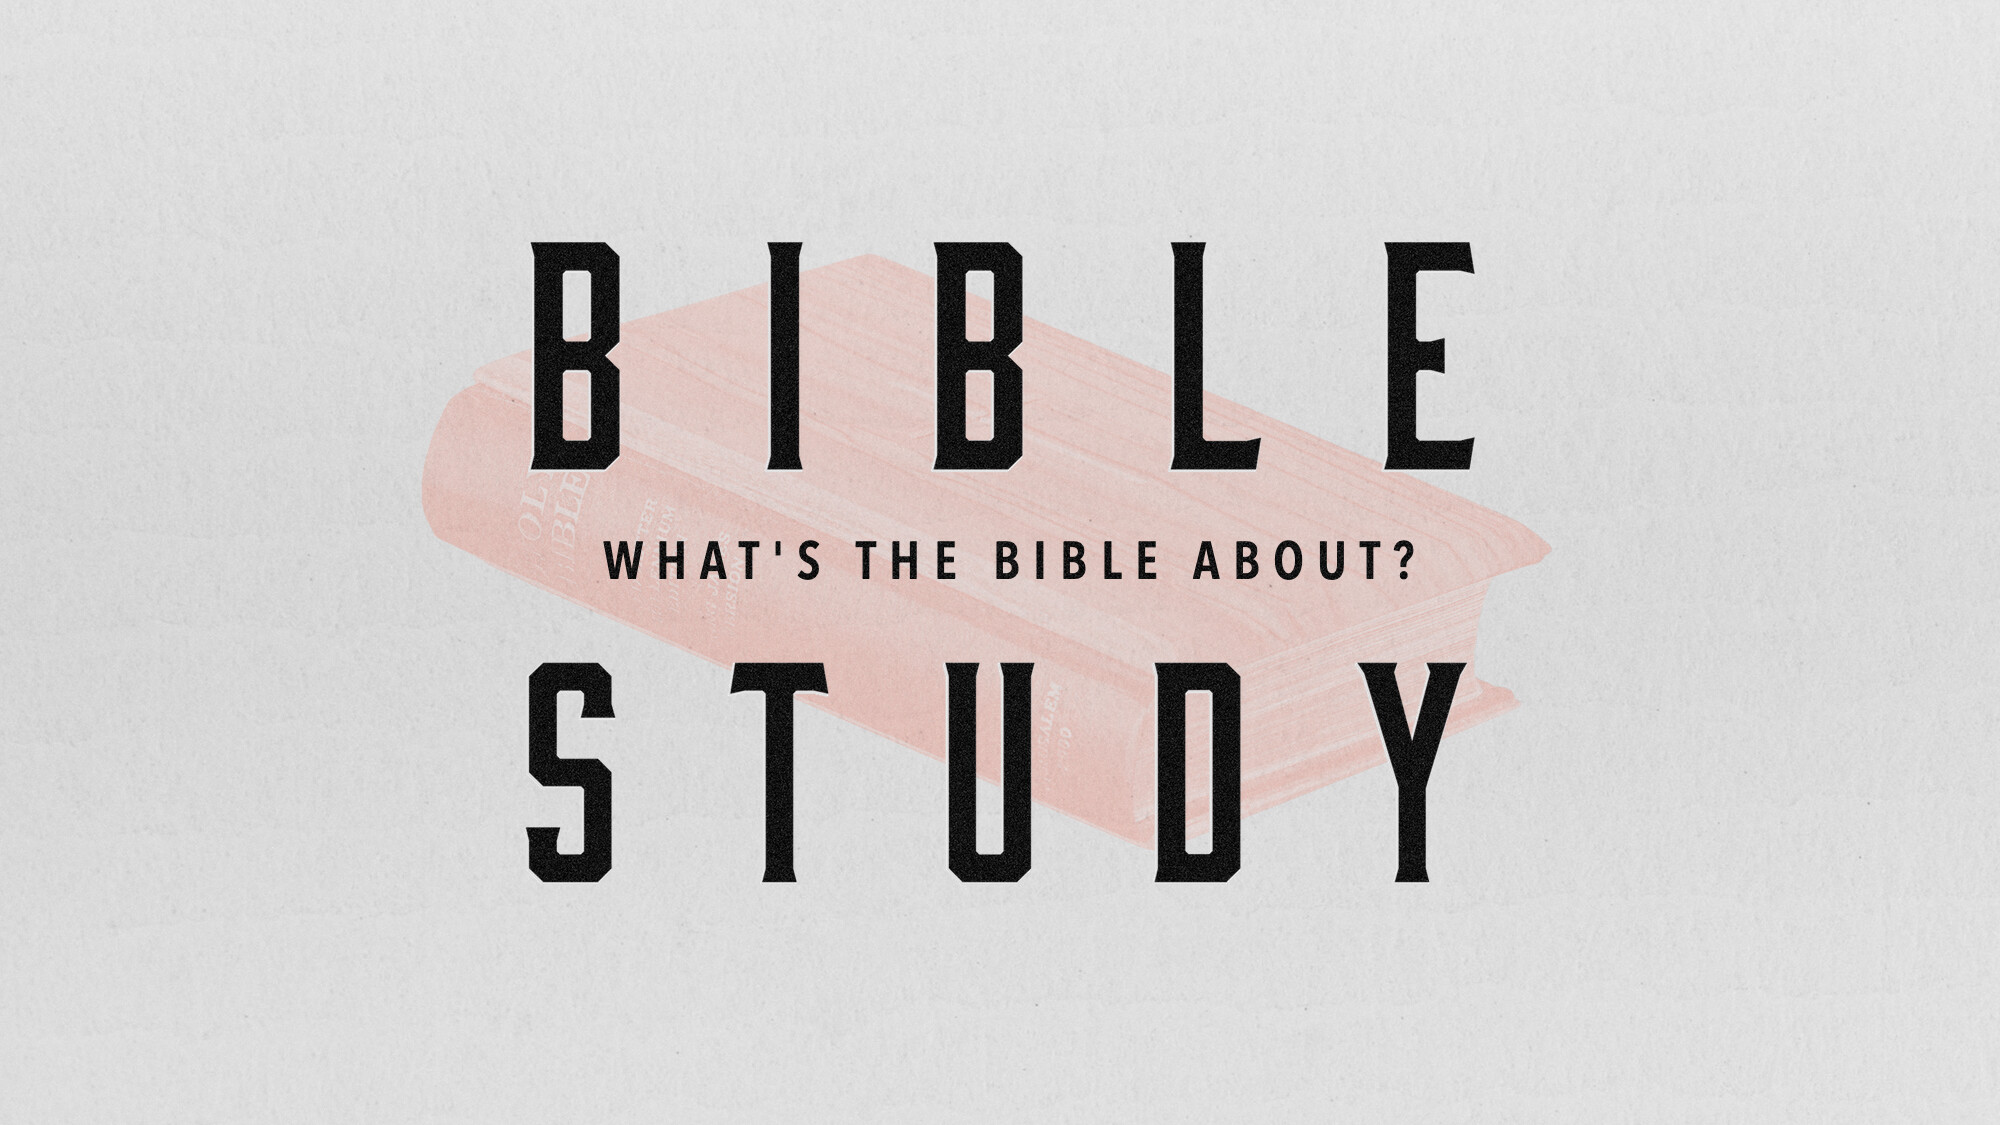 What's the Bible About?